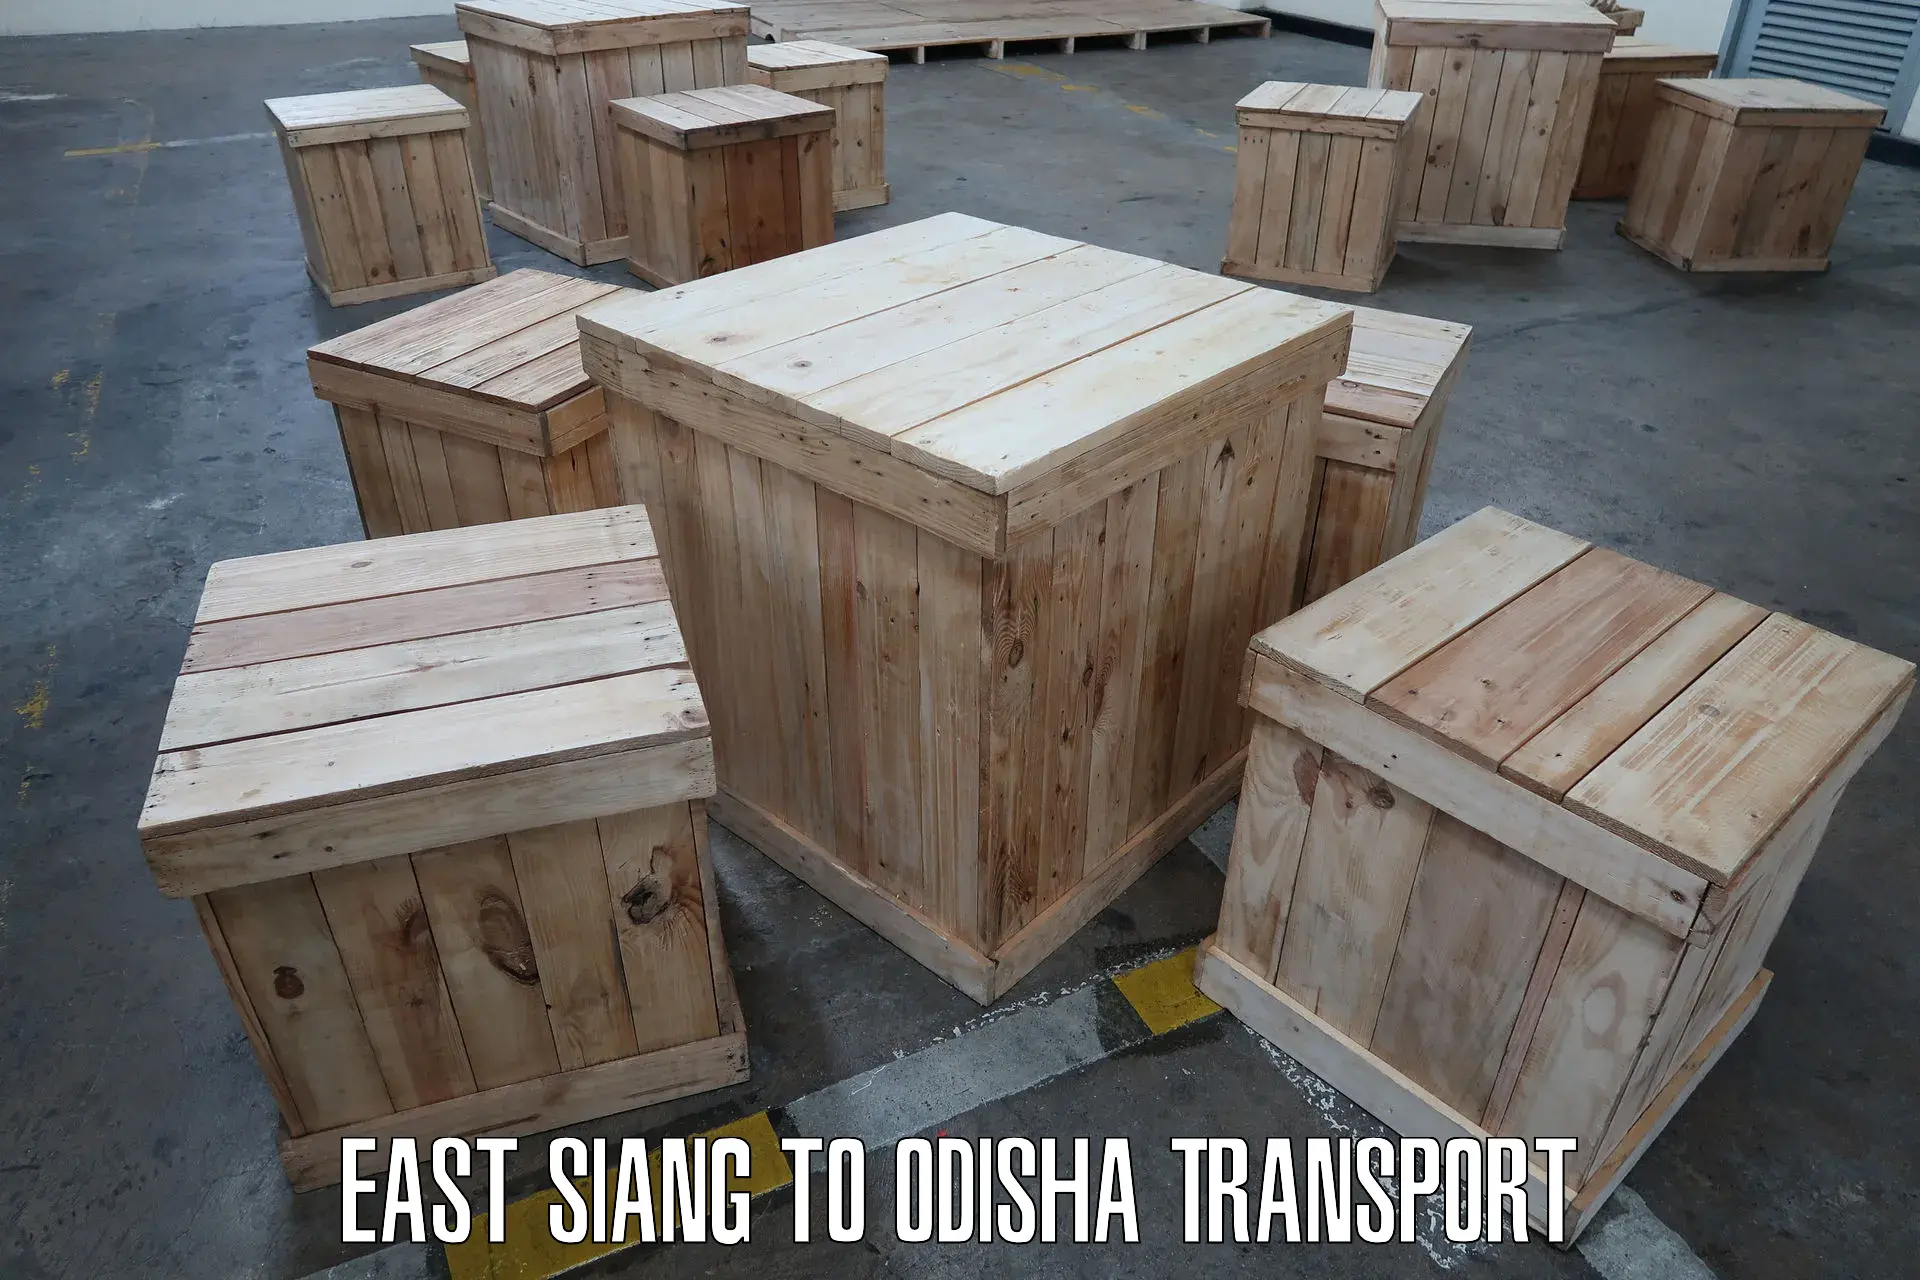 Daily parcel service transport East Siang to Binka